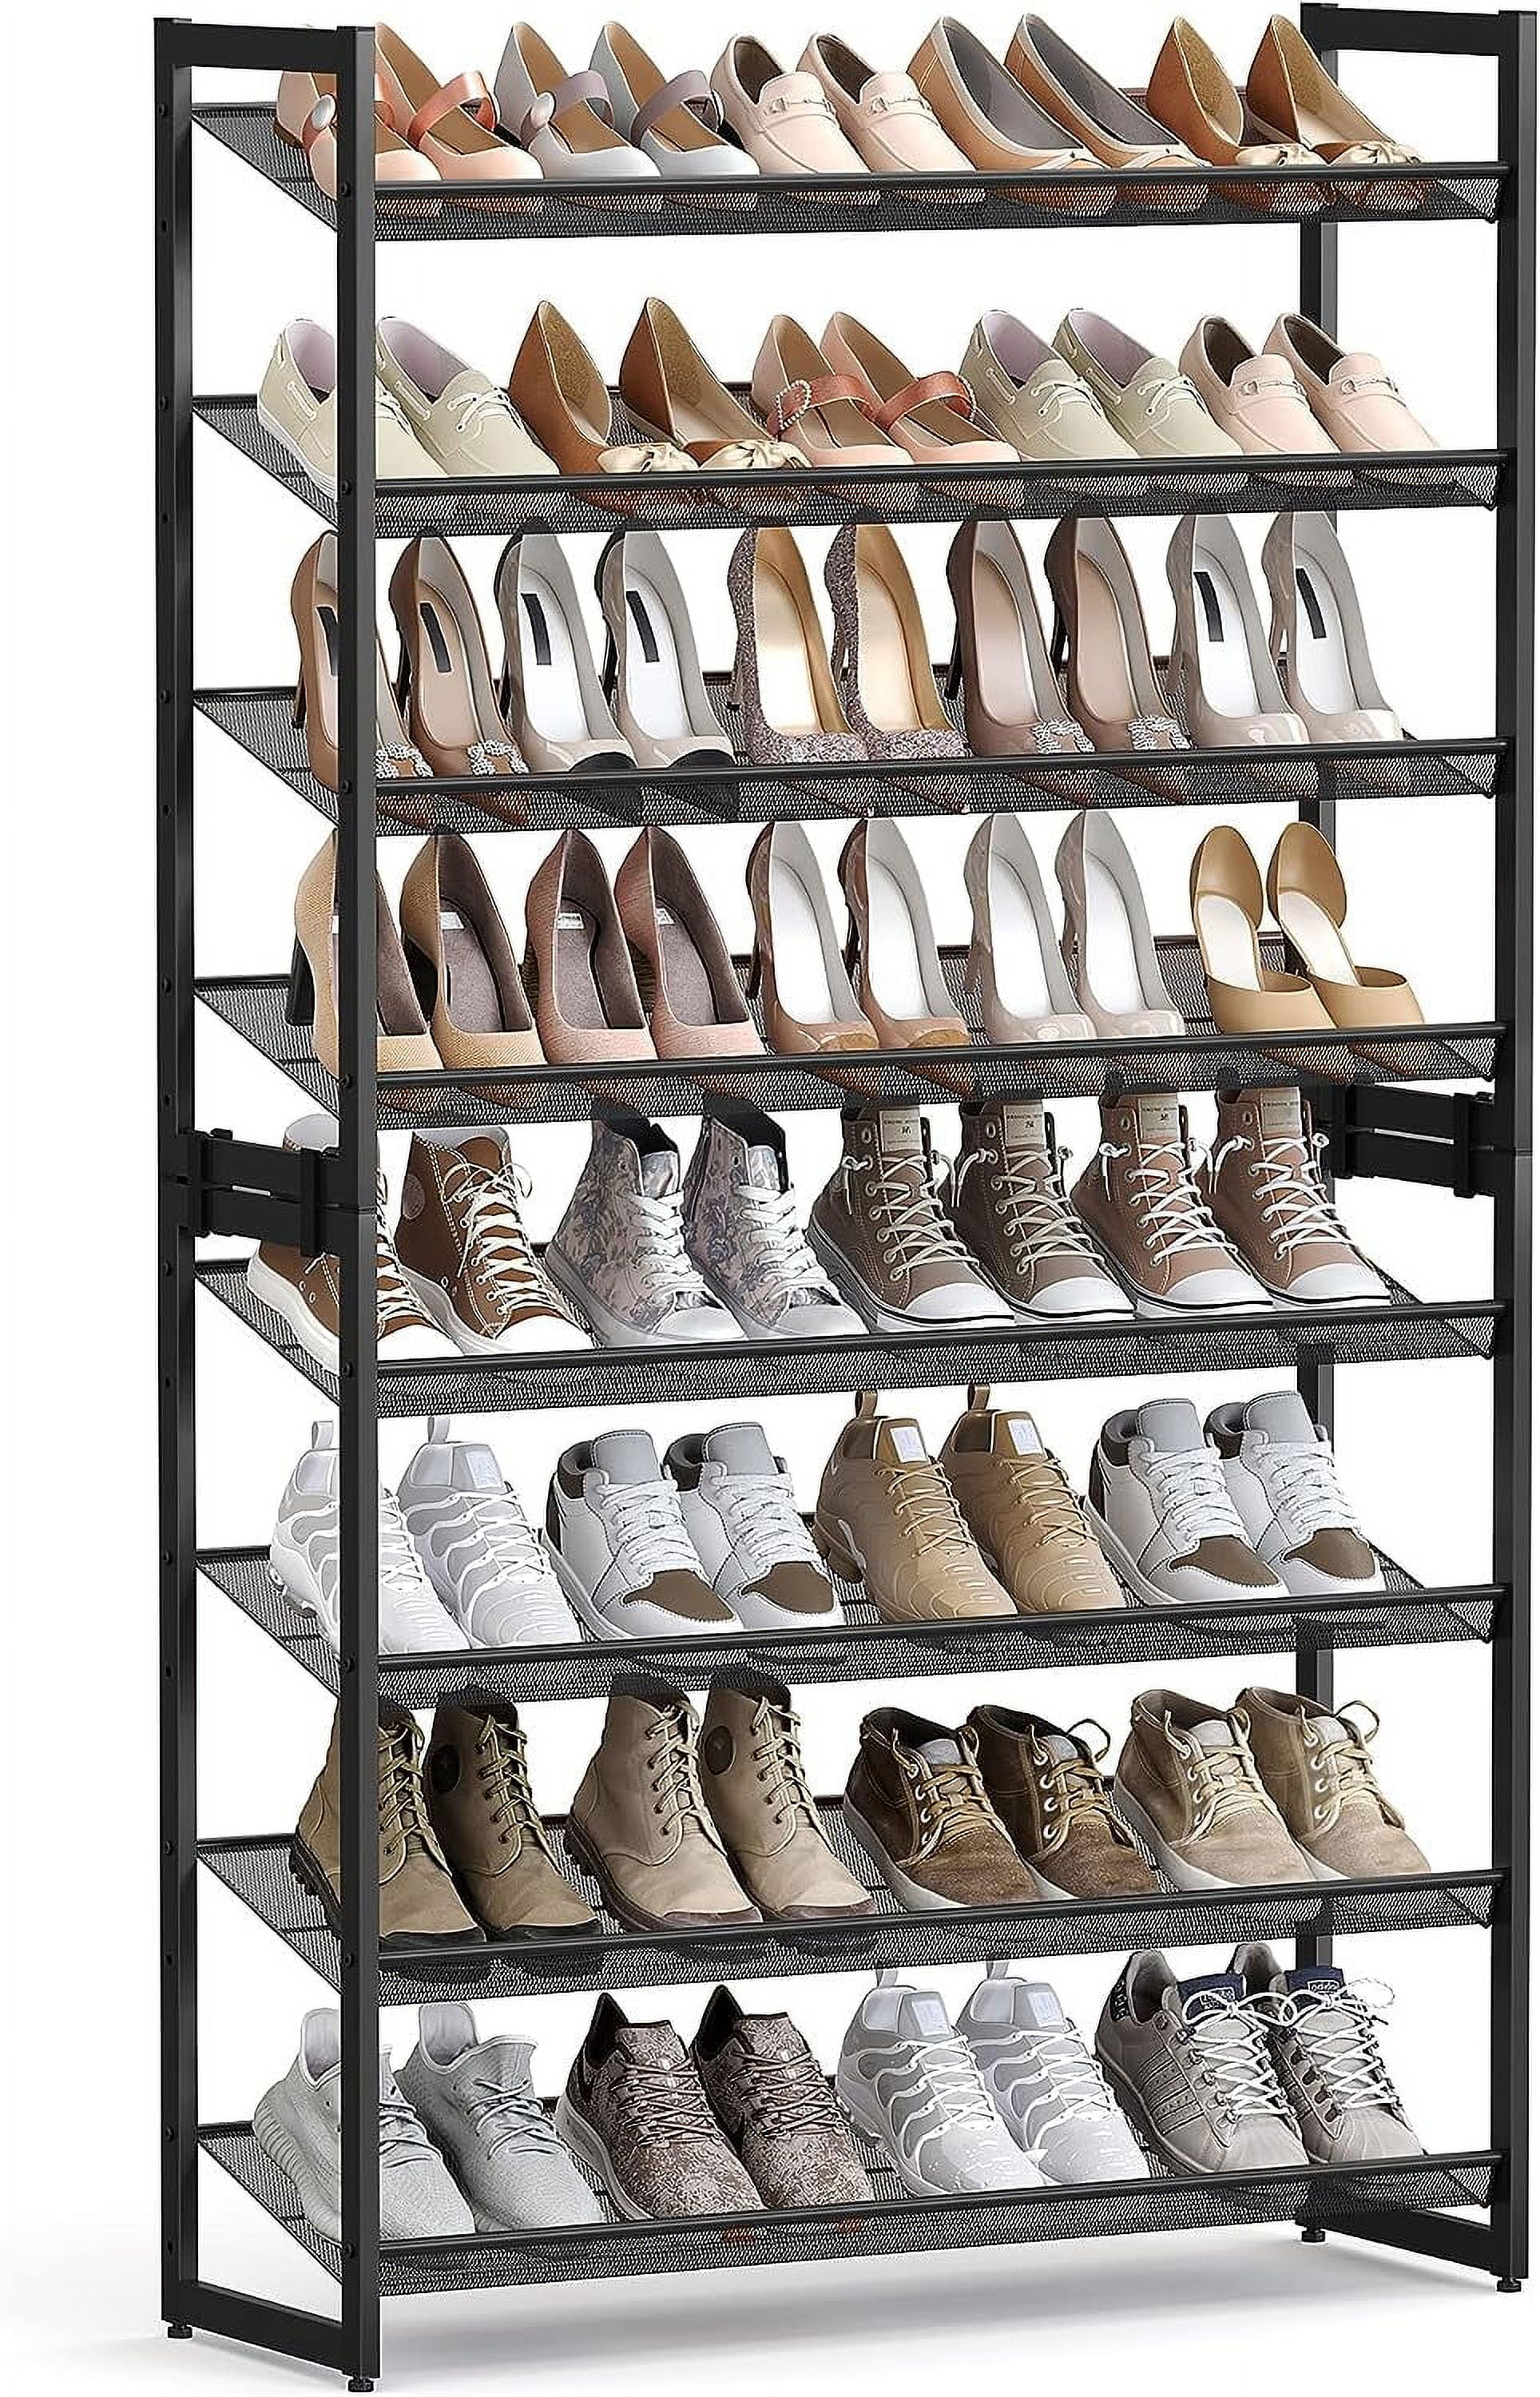 VASAGLE 8 Tier Shoe Rack, Shoe Organizer for Closet, Entryway, 32-40 Pairs  of Shoes, Large Shoe Rack Organizer with 7 Metal Mesh Shelves, 11.8 x 39.4  x 59.8 Inches, Rustic Brown and Black